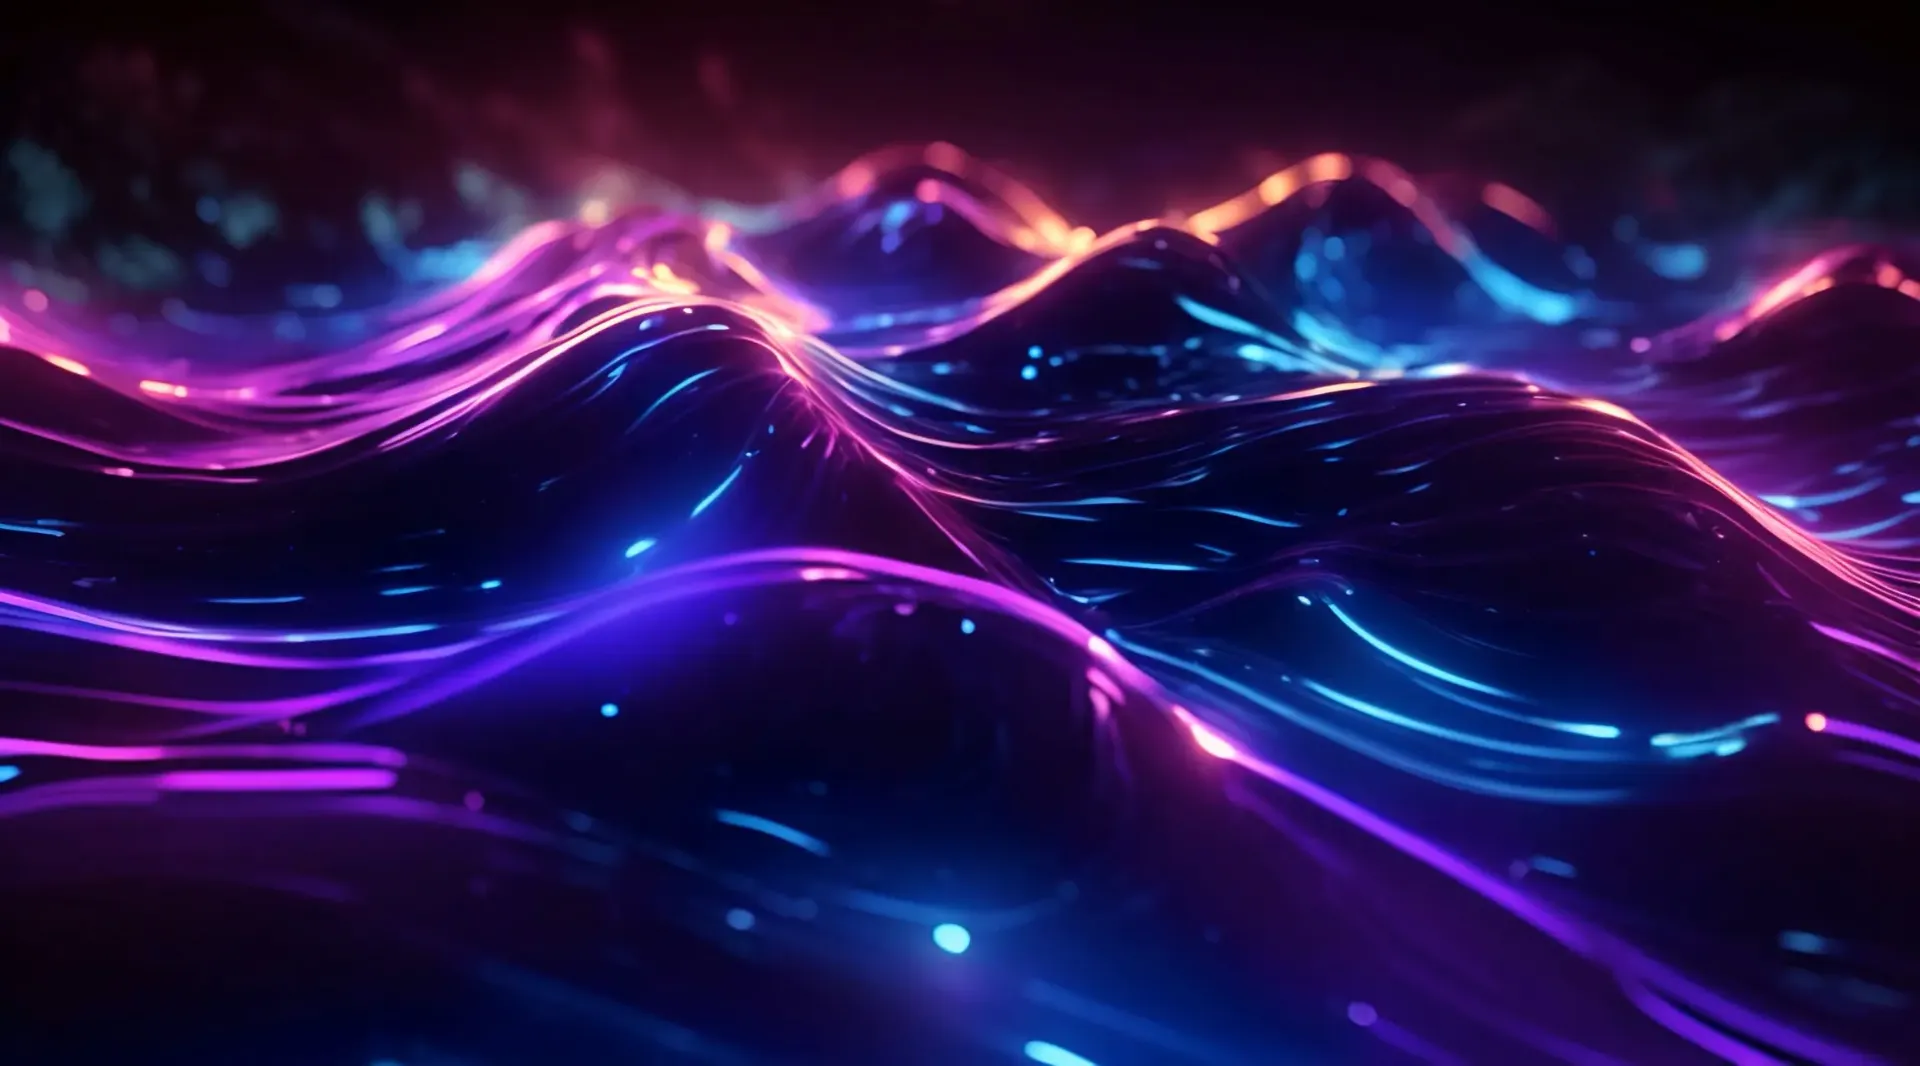 Mesmerizing Purple and Blue Waves Cinematic Backdrop